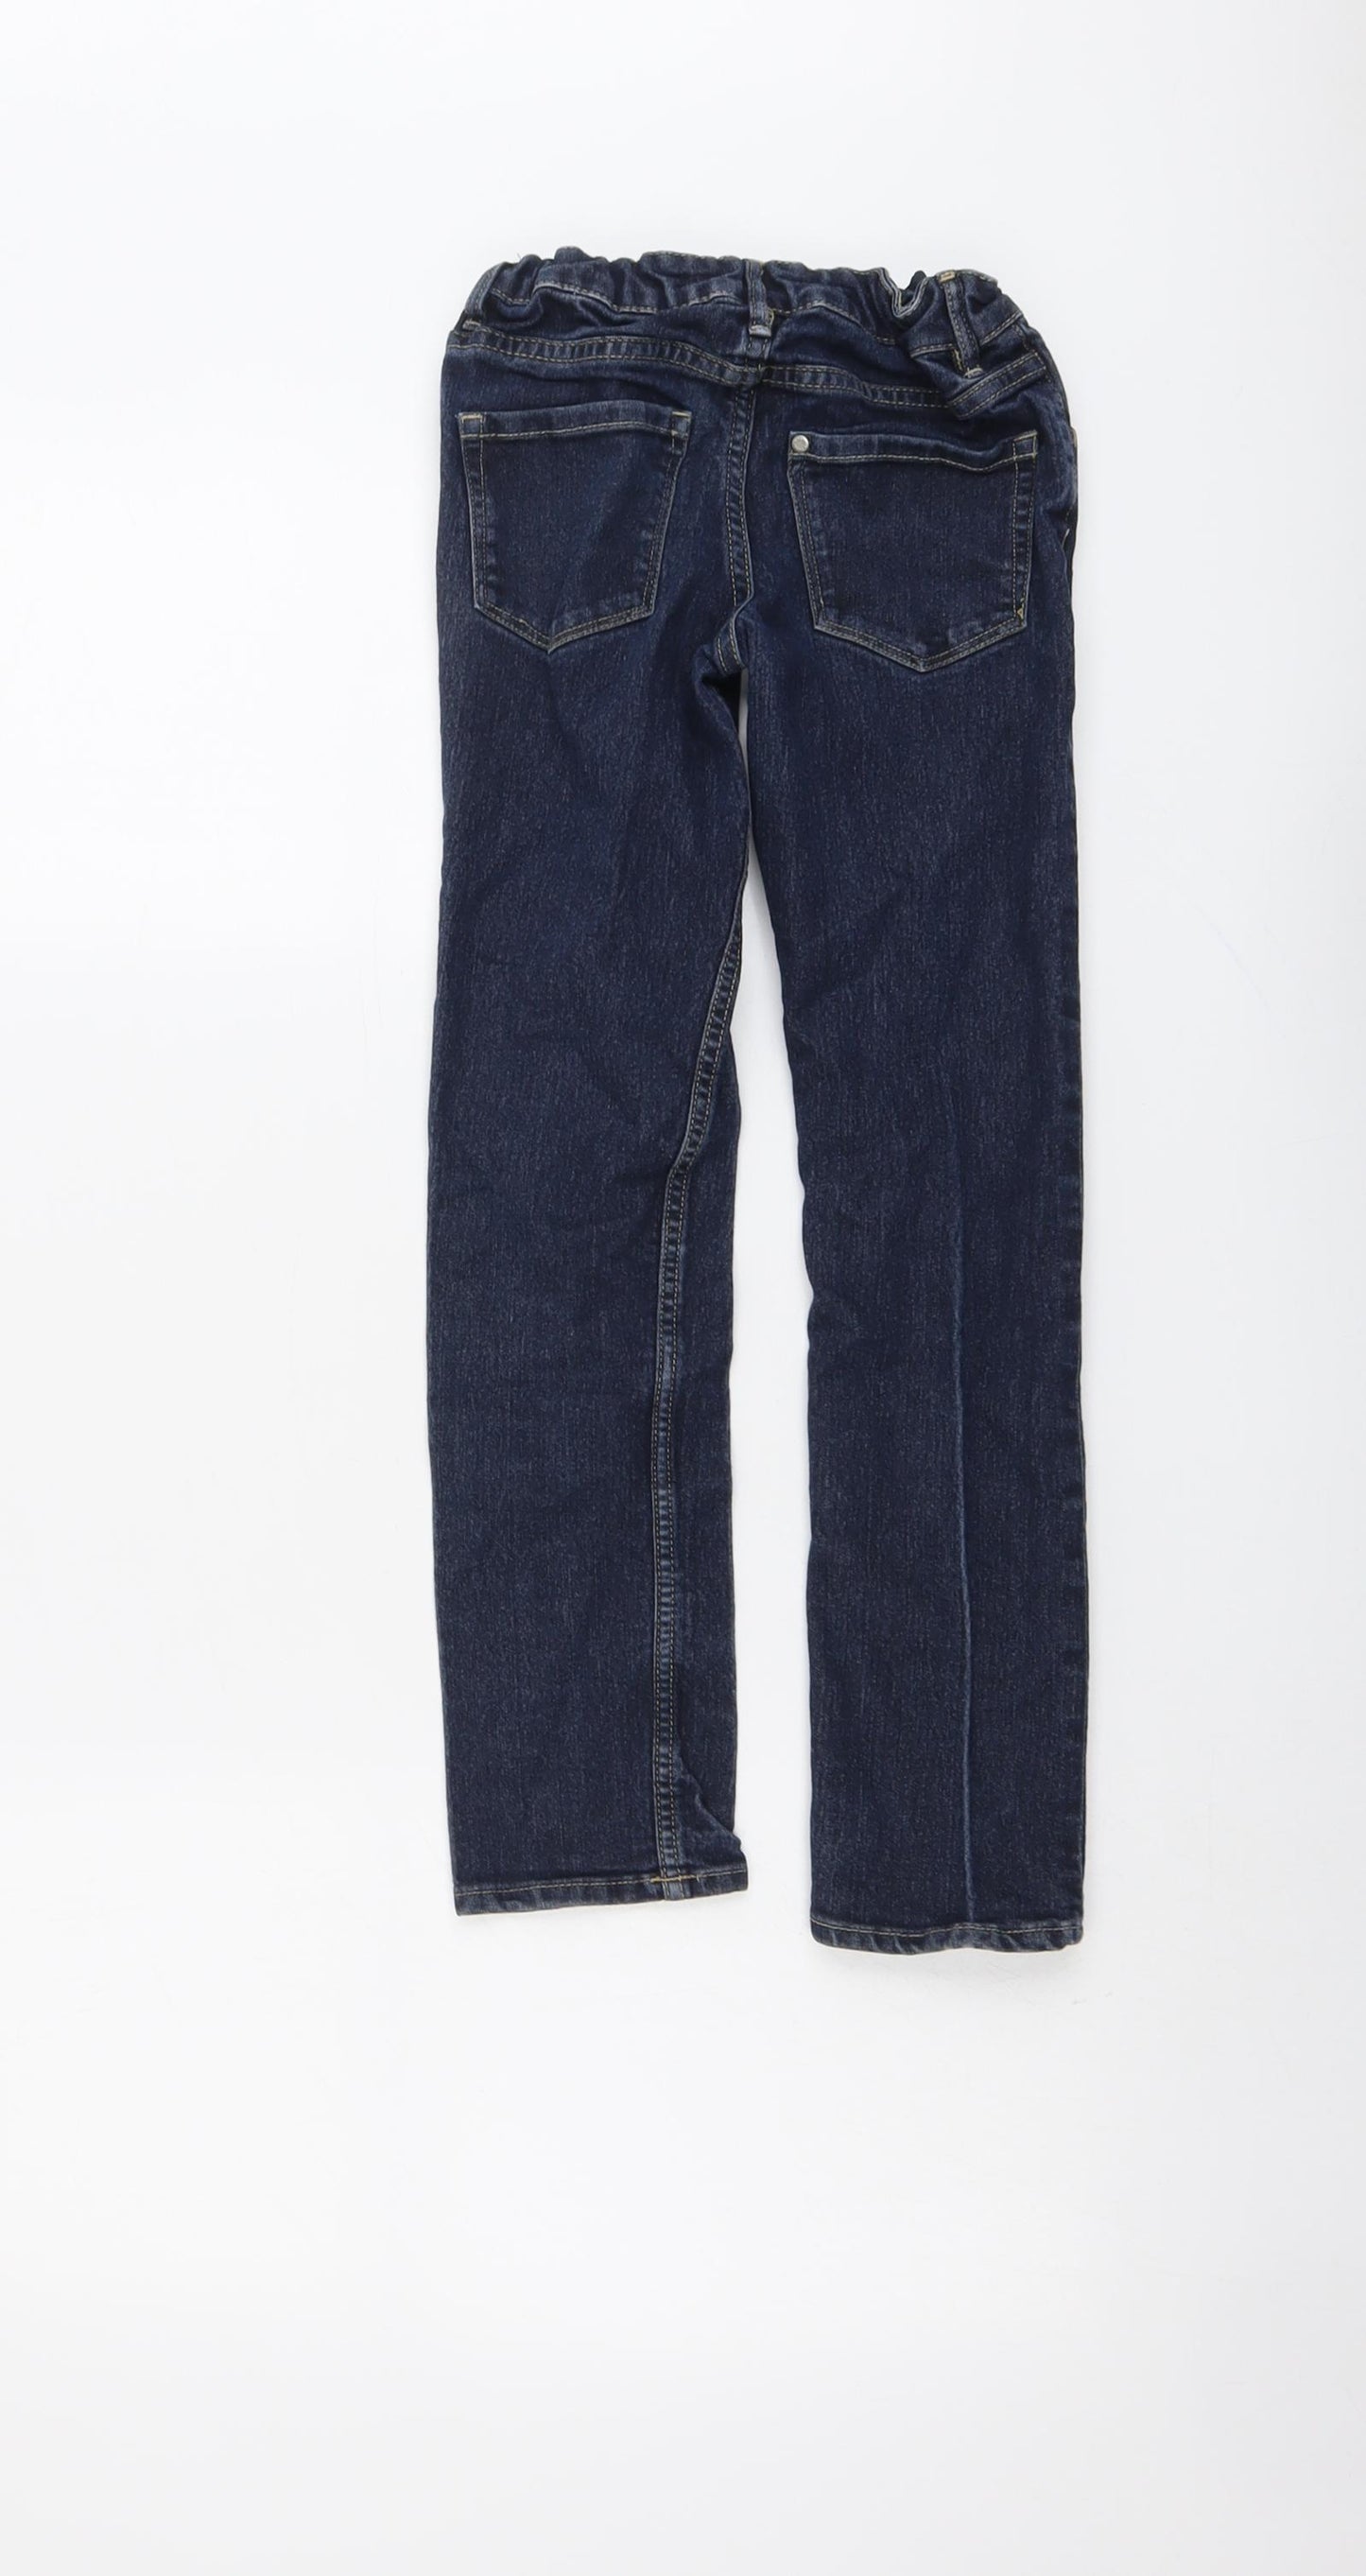 H&M Boys Blue Cotton Skinny Jeans Size 7-8 Years Regular Button